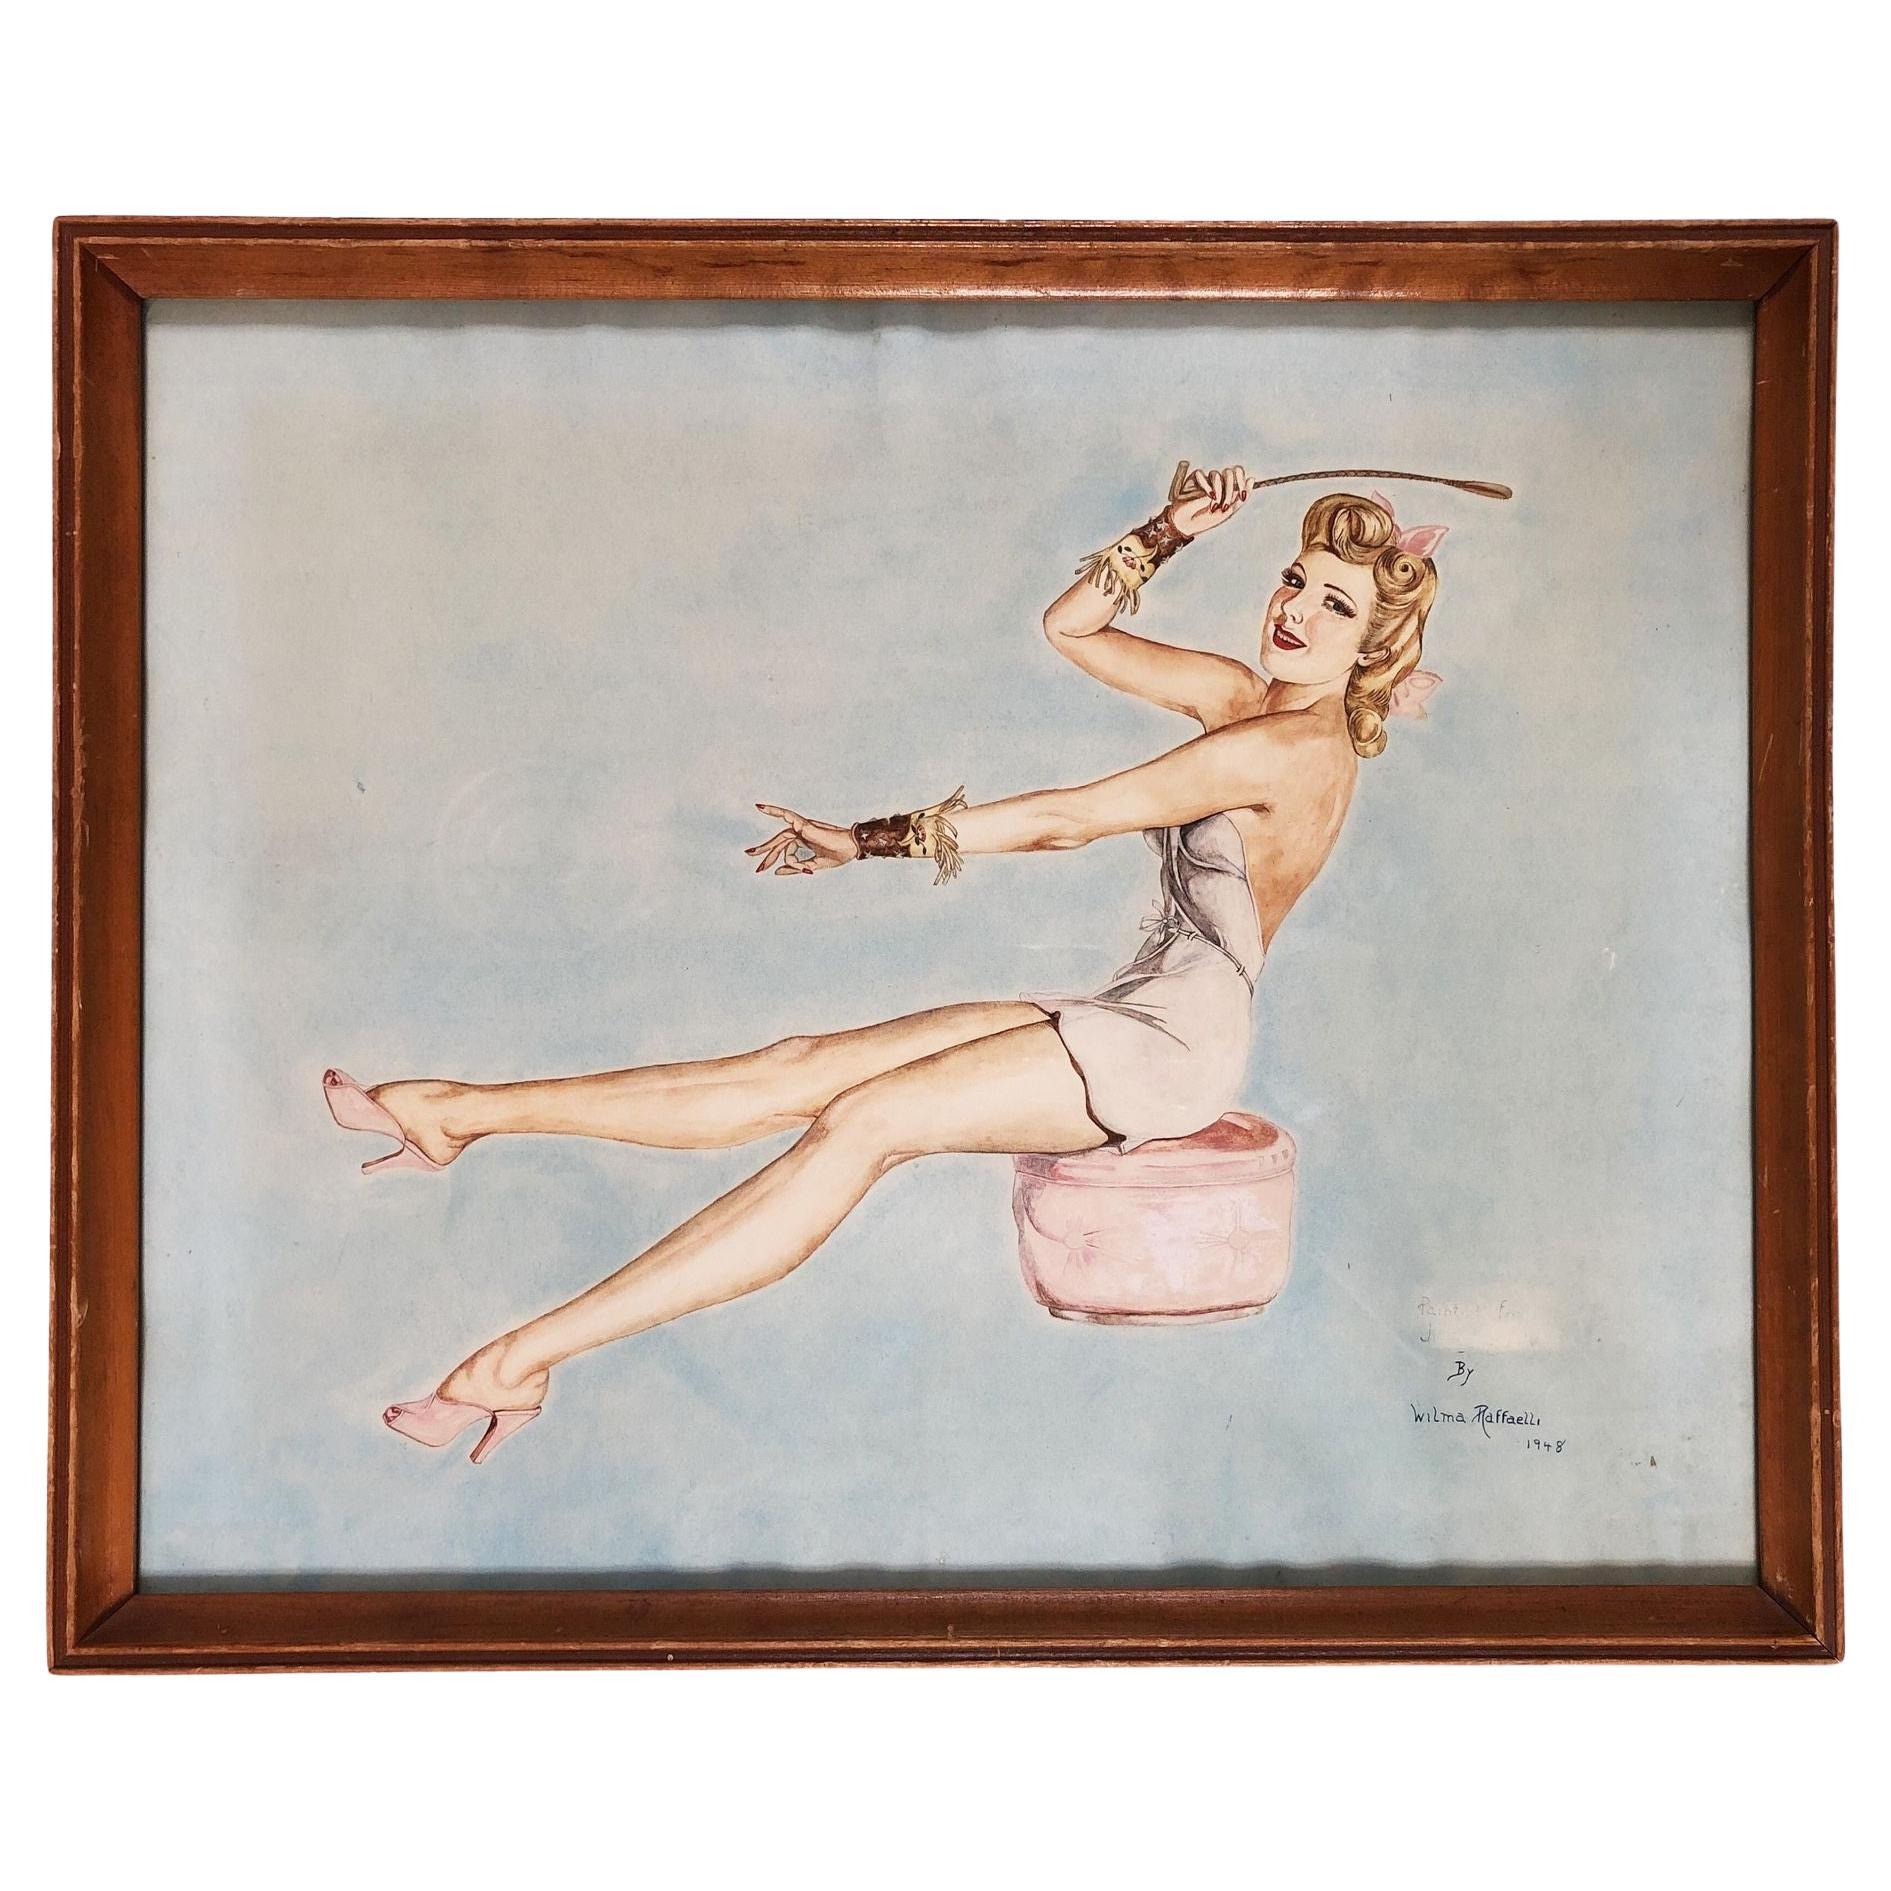 "Lady on Ottoman". Wood Framed Pinup Painting by Wilma Raffaelli, 1948. For Sale